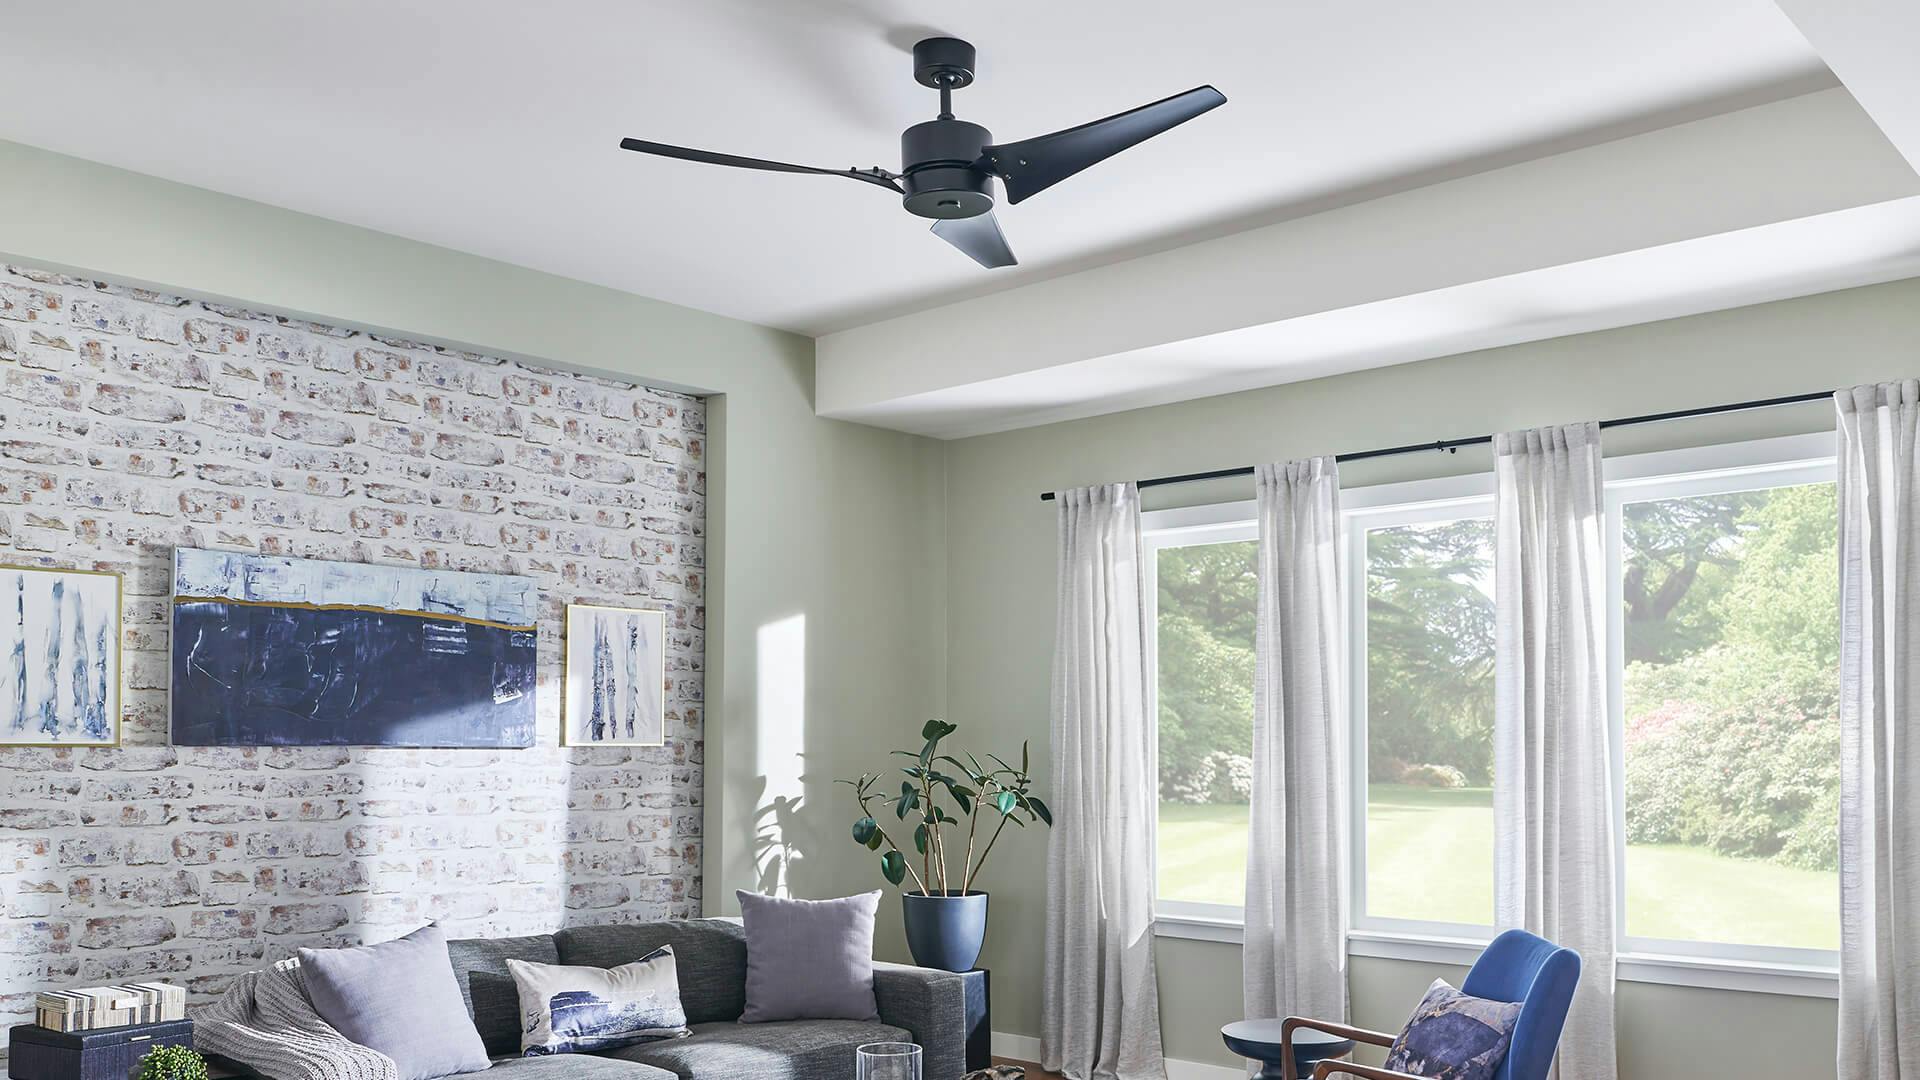 Living room with Motu ceiling fan in black finish during the day with three windows and grey couch